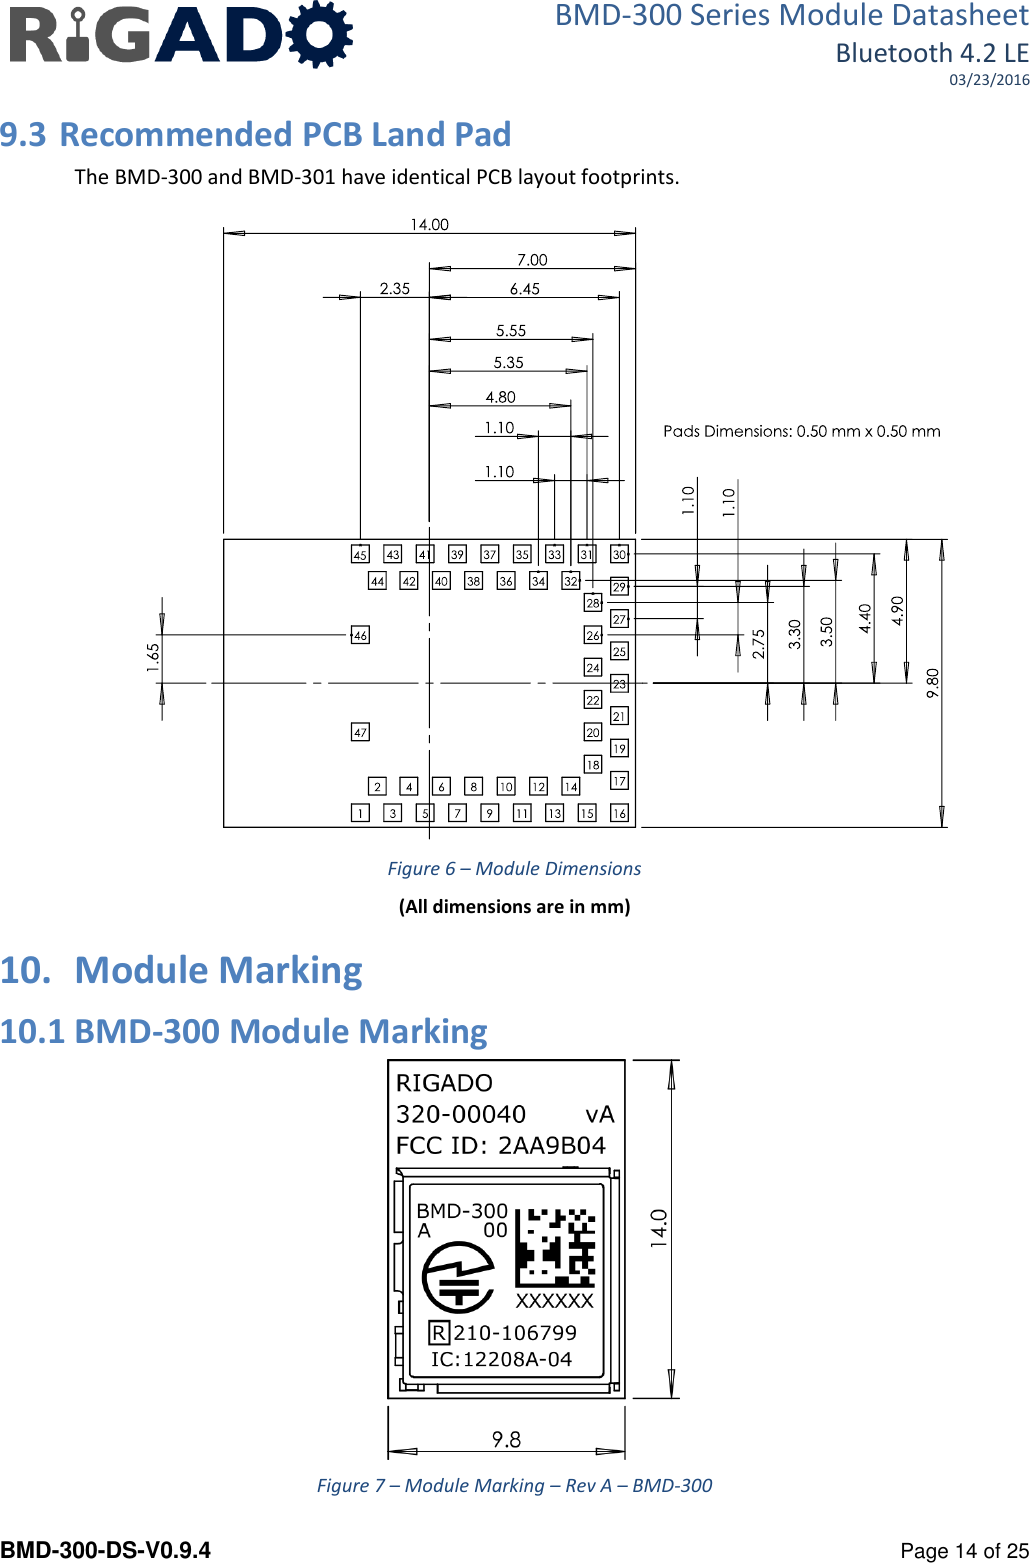 BMD-300 Series Module Datasheet Bluetooth 4.2 LE 03/23/2016  BMD-300-DS-V0.9.4      Page 14 of 25 9.3 Recommended PCB Land Pad The BMD-300 and BMD-301 have identical PCB layout footprints.   Figure 6 – Module Dimensions (All dimensions are in mm) 10. Module Marking 10.1 BMD-300 Module Marking  Figure 7 – Module Marking – Rev A – BMD-300 